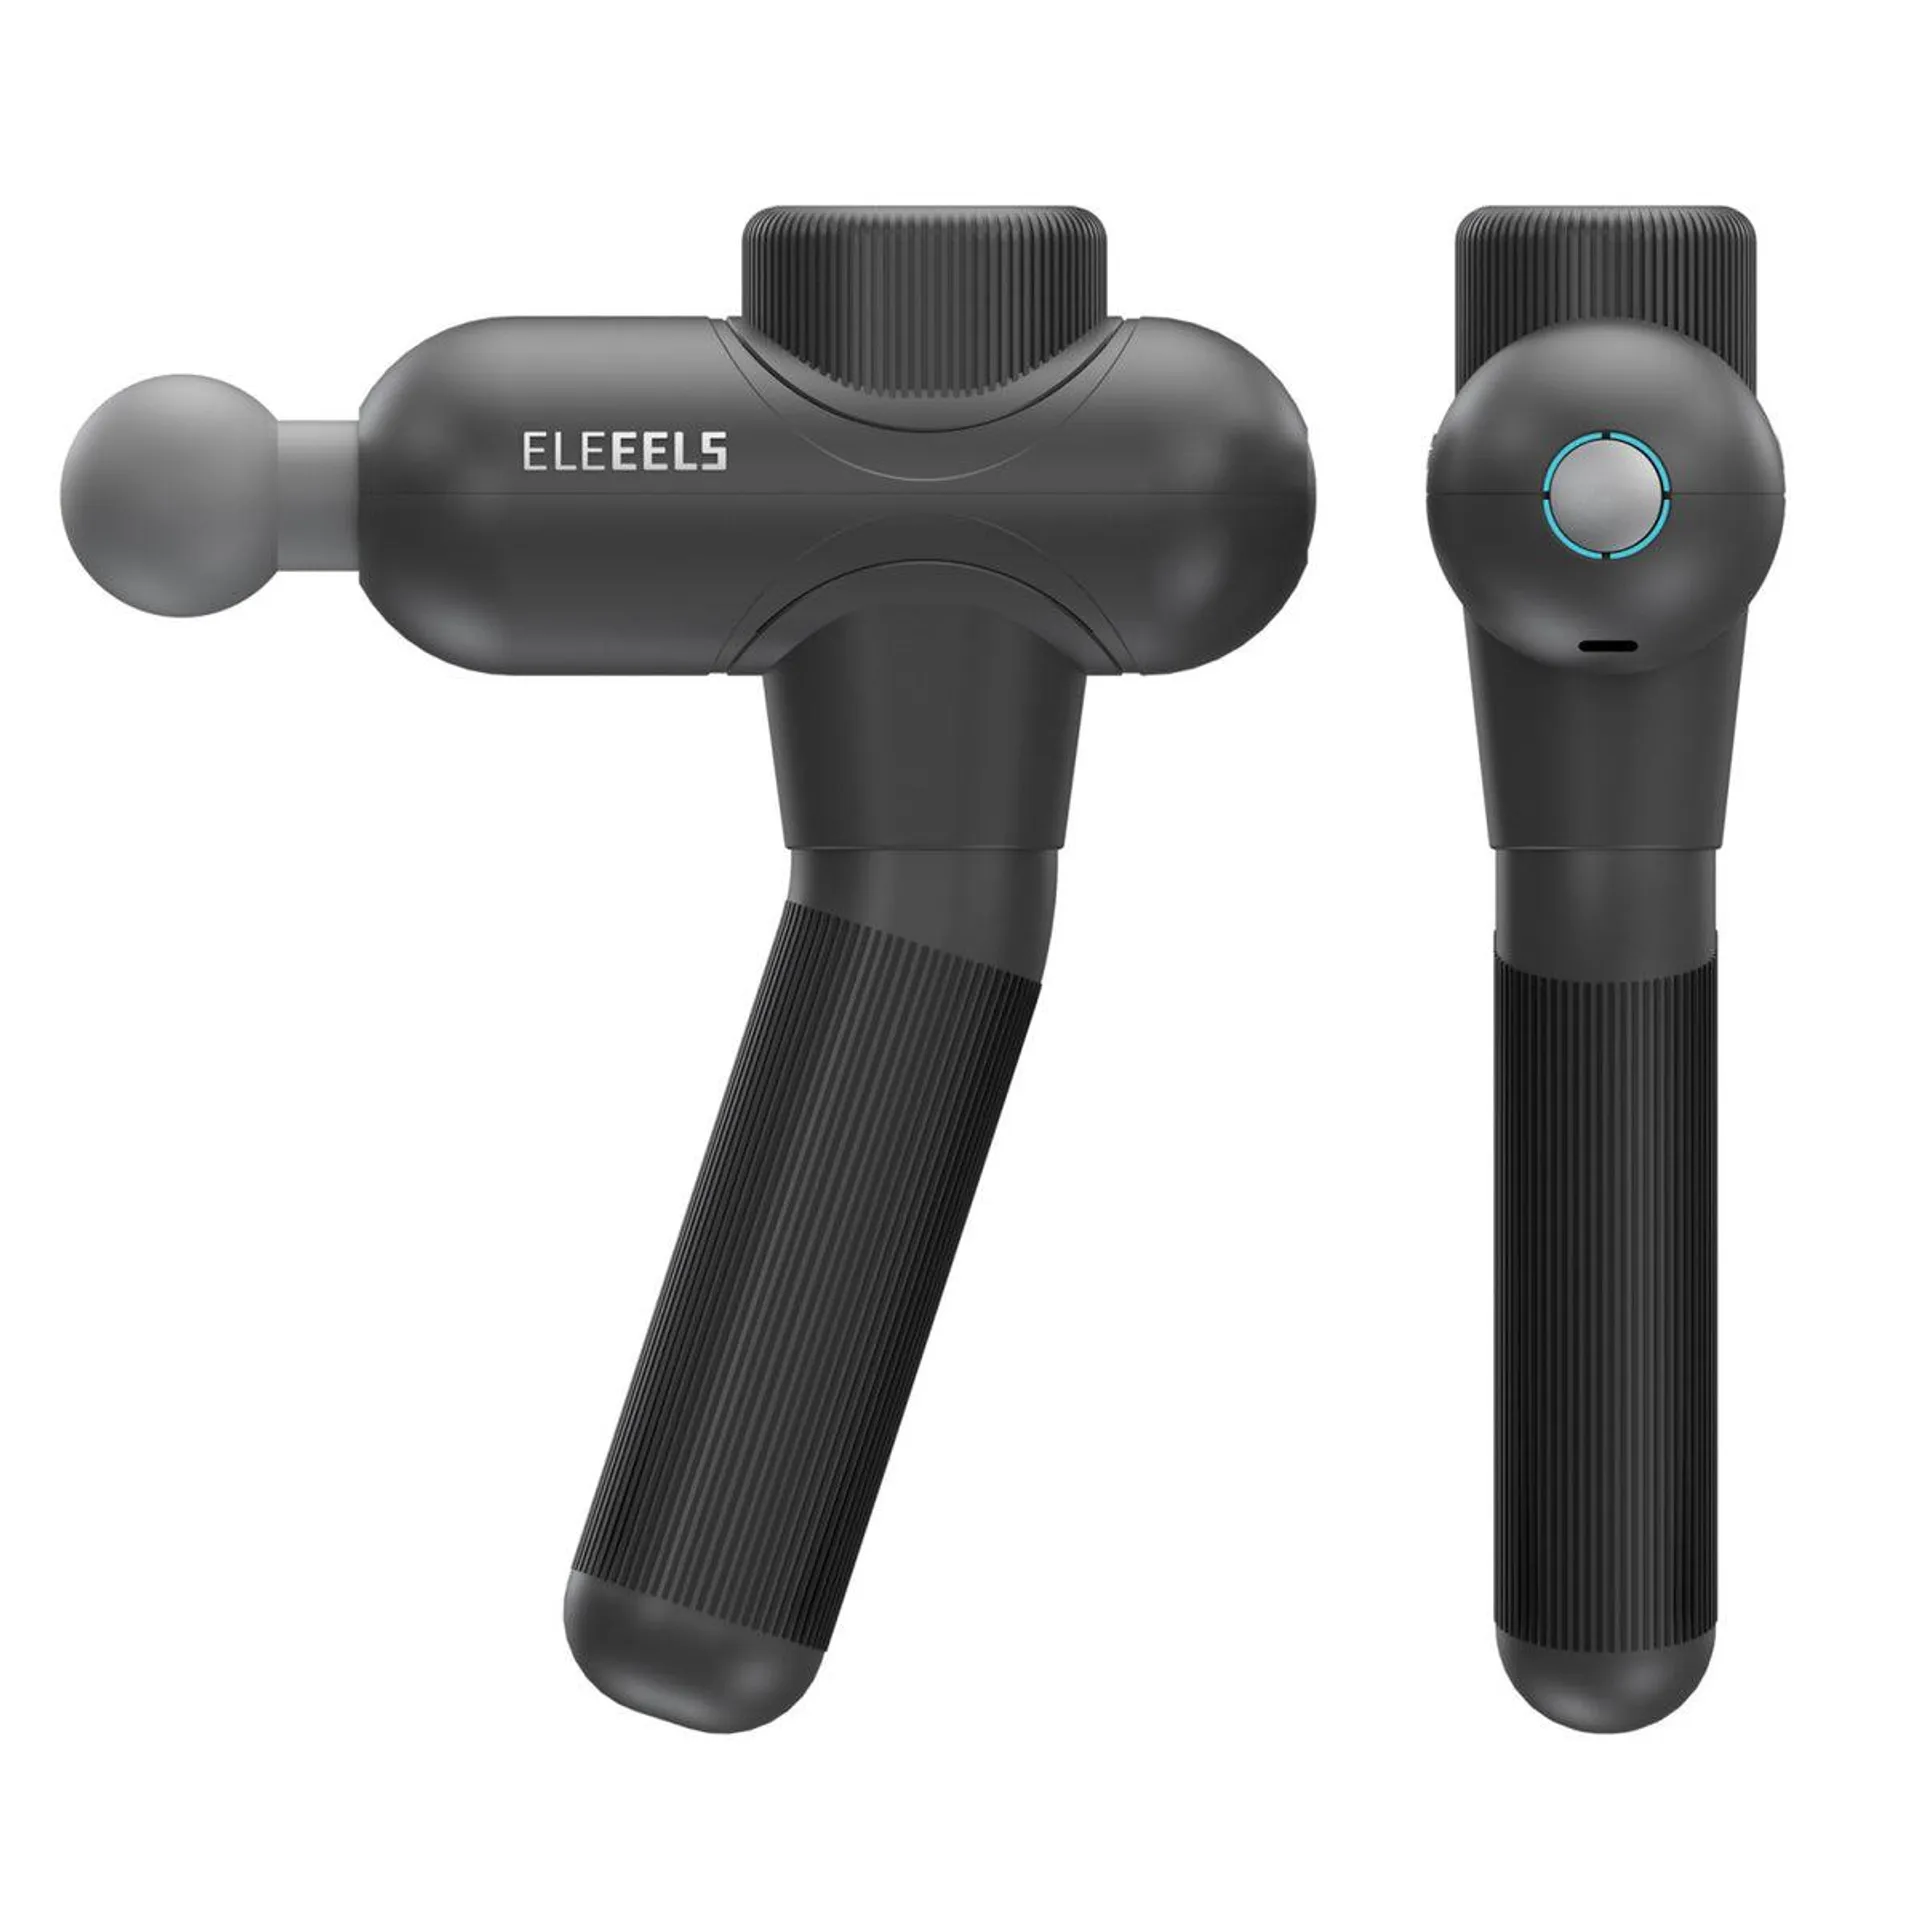 Eleeels X3 Percussive Massage Gun With Inclined Handle